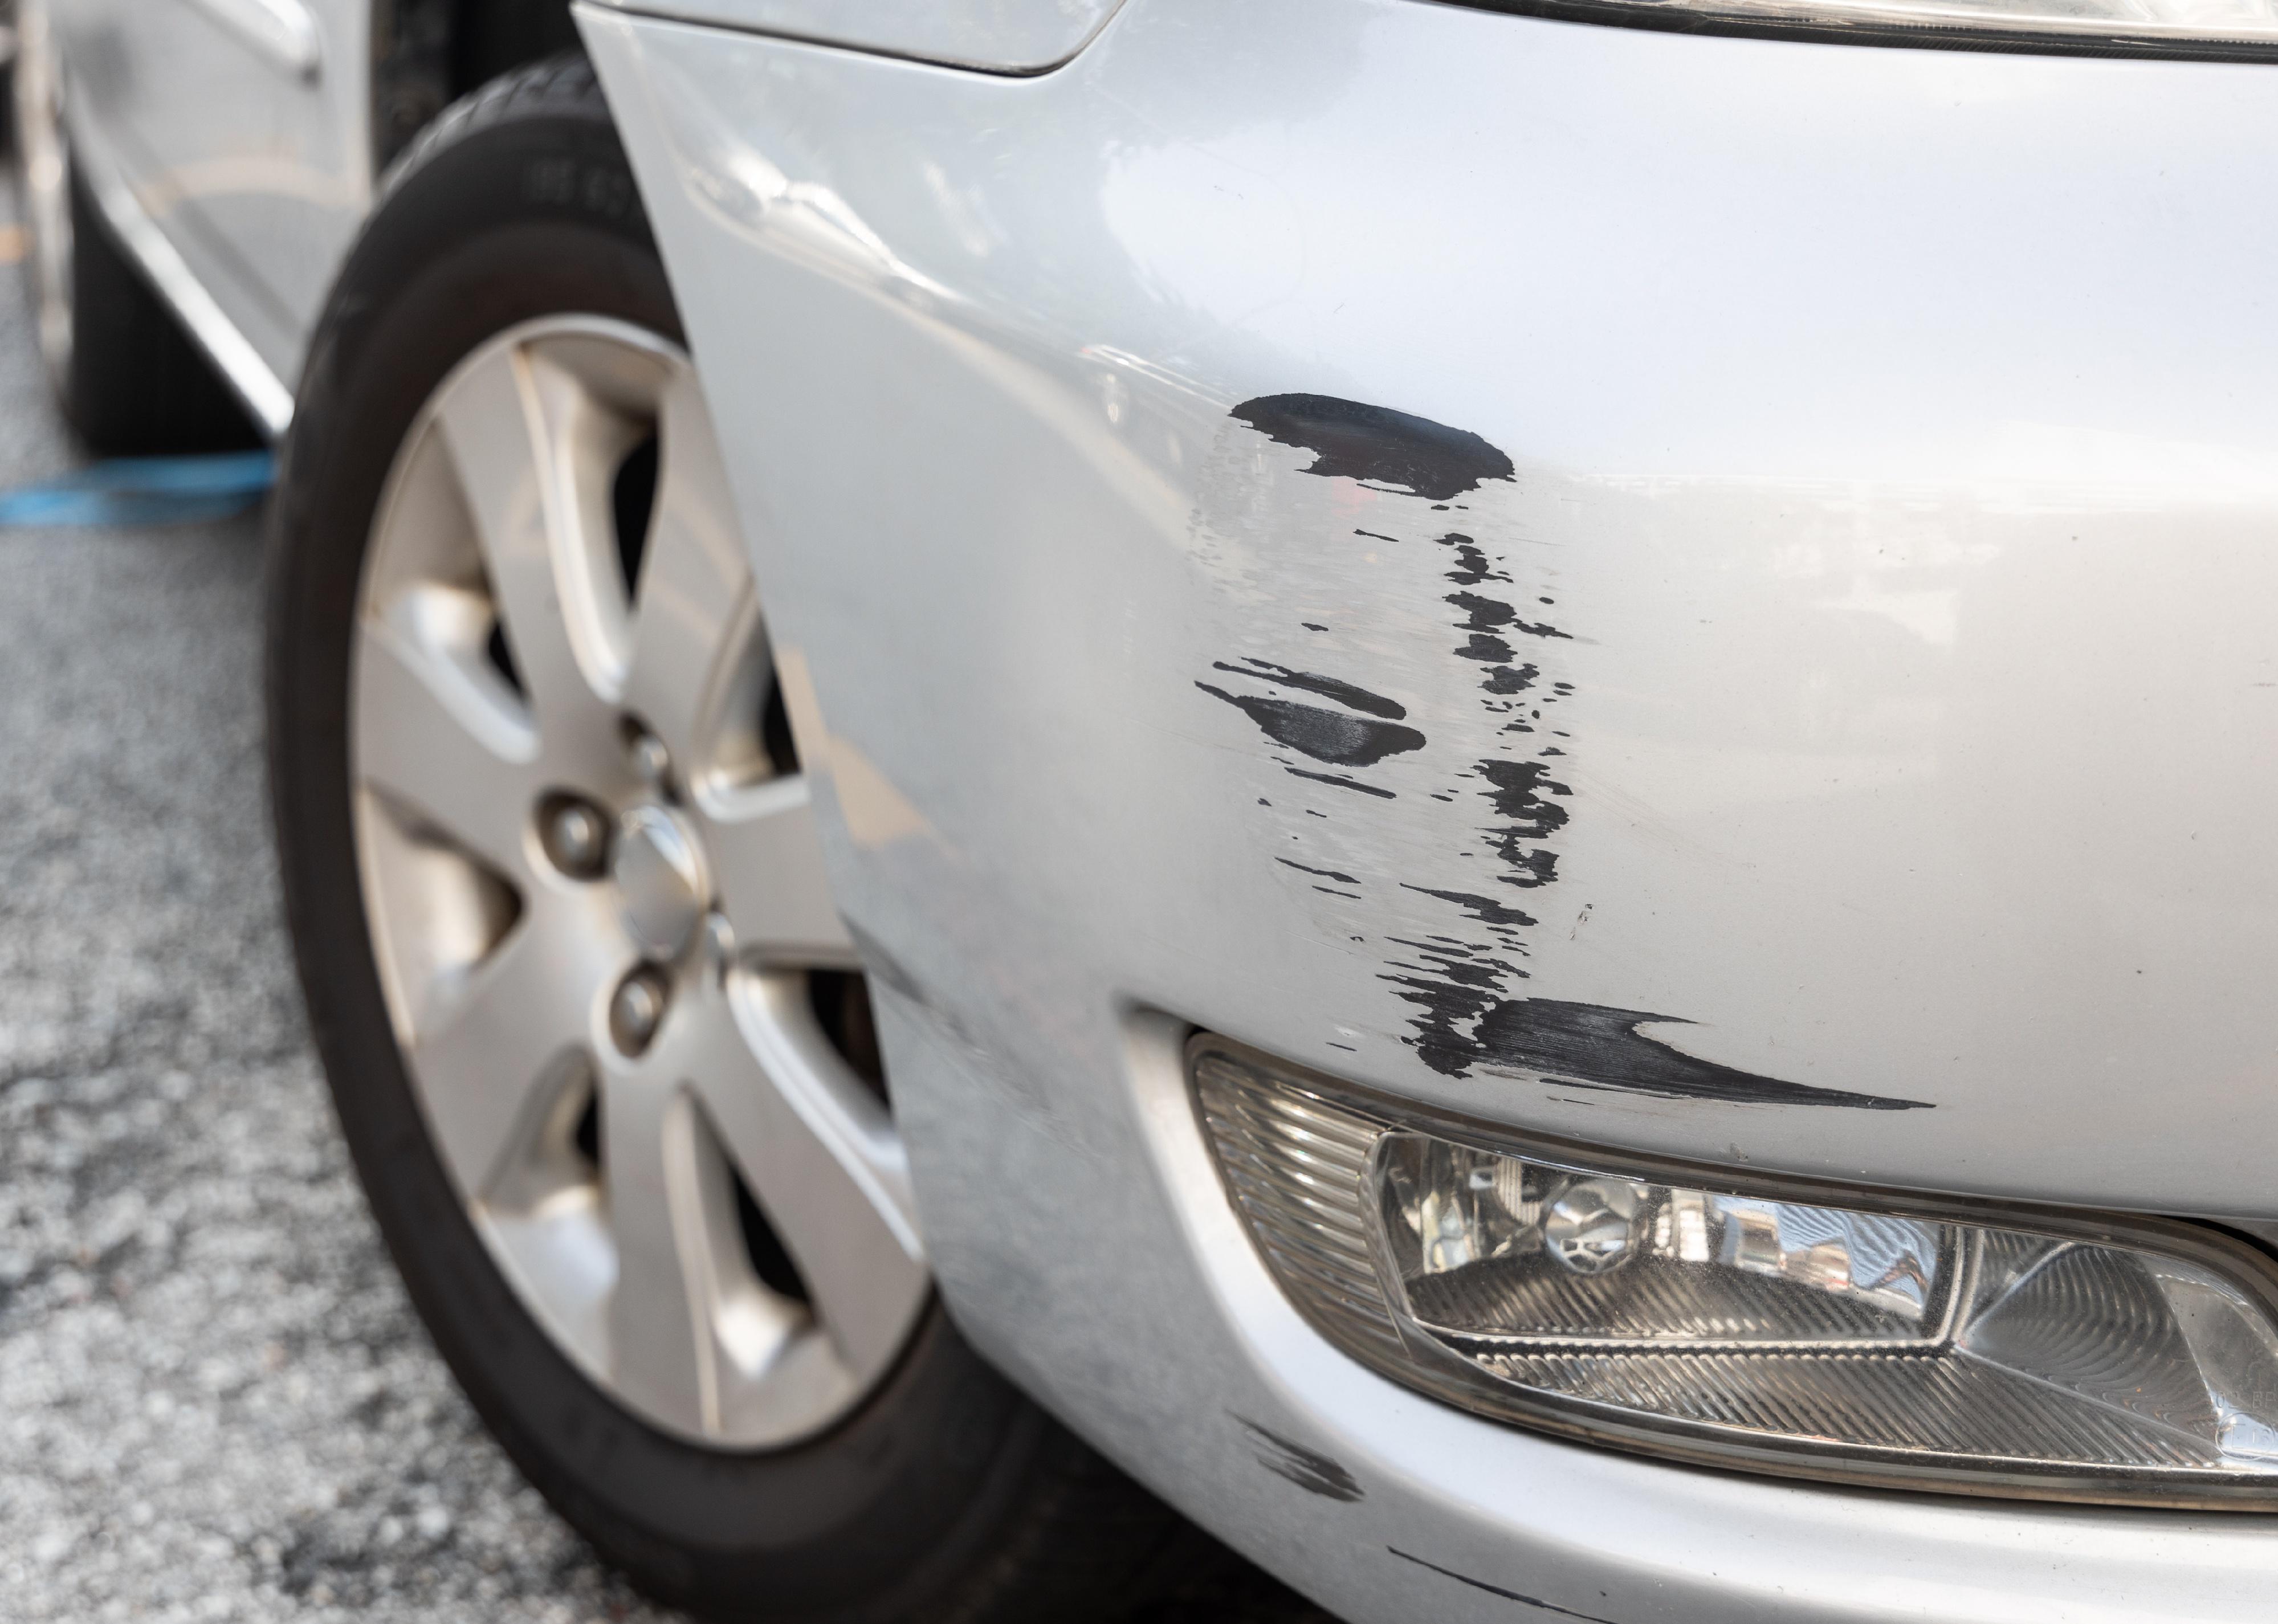 Scratches on the front bumper of a car